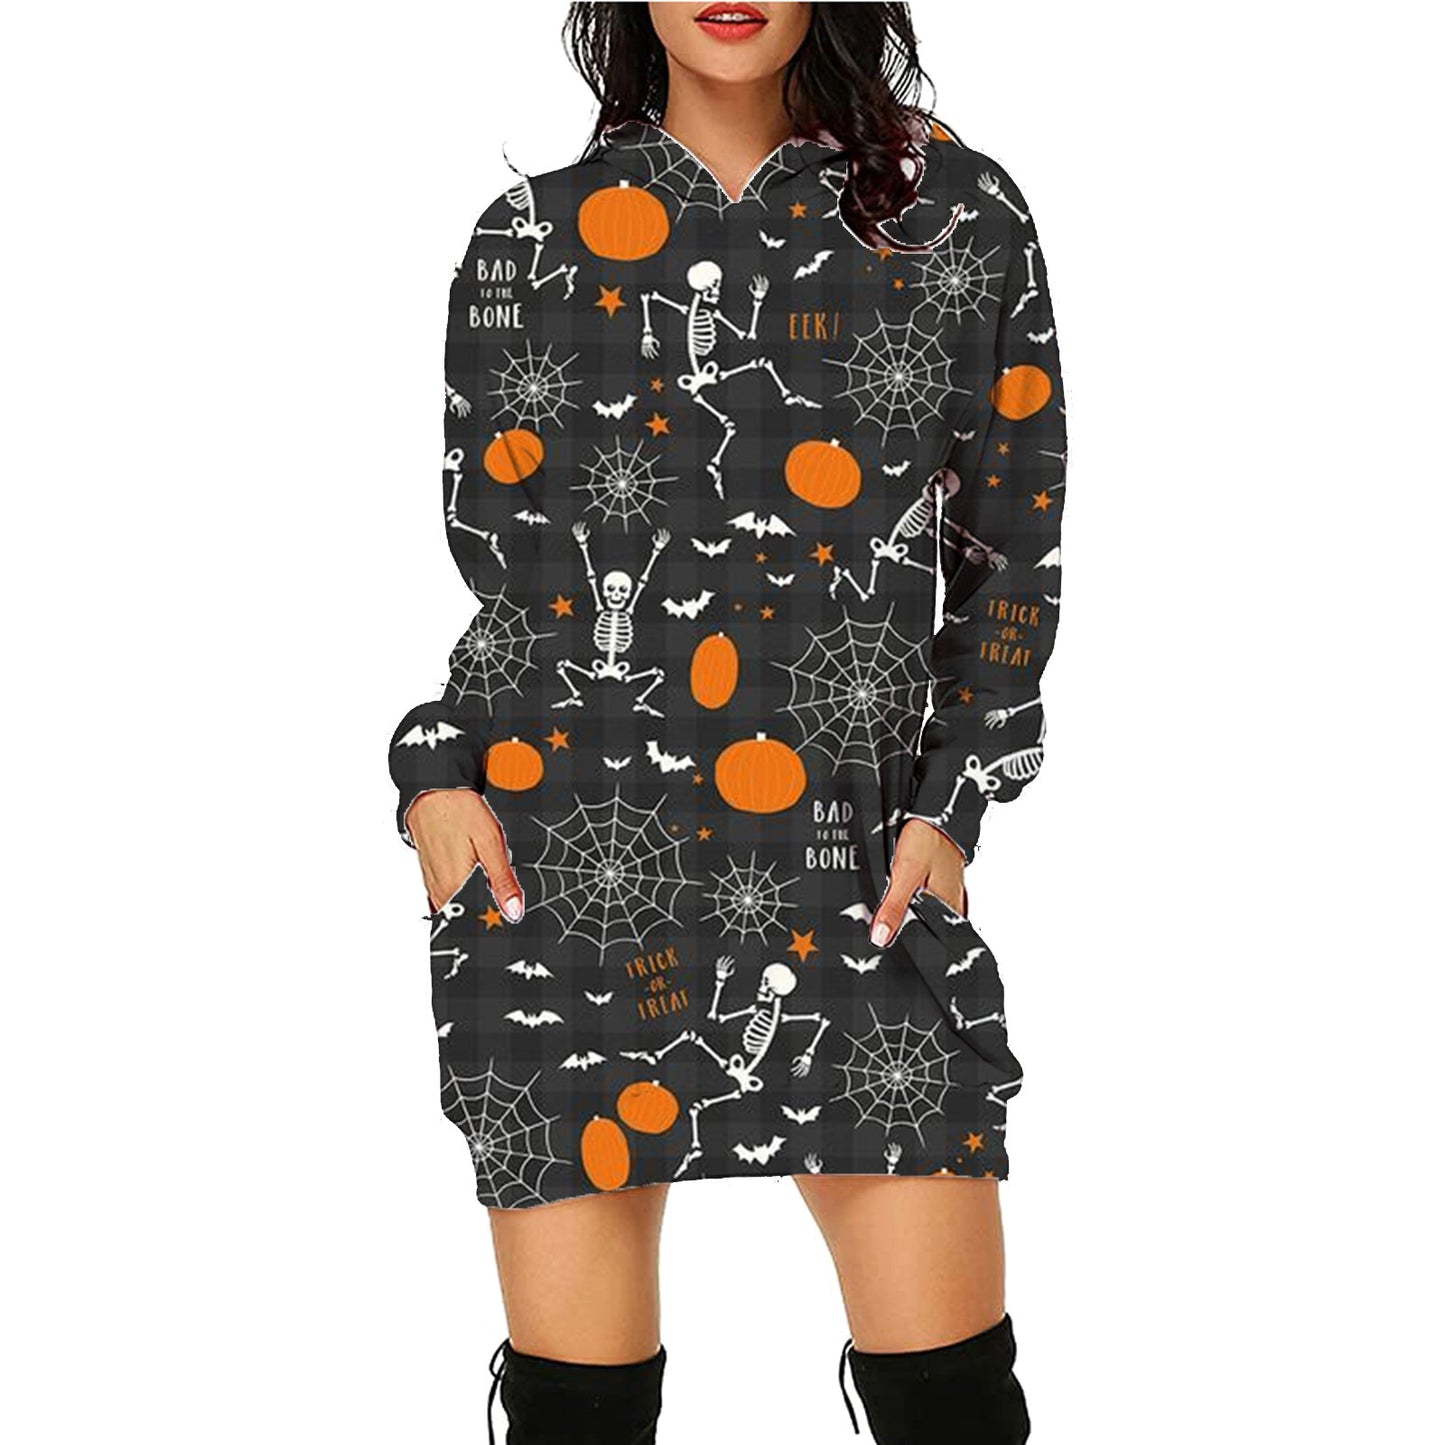 Halloween Print Long Hoodie With Pockets Sweater Long Sleeve Clothes Women